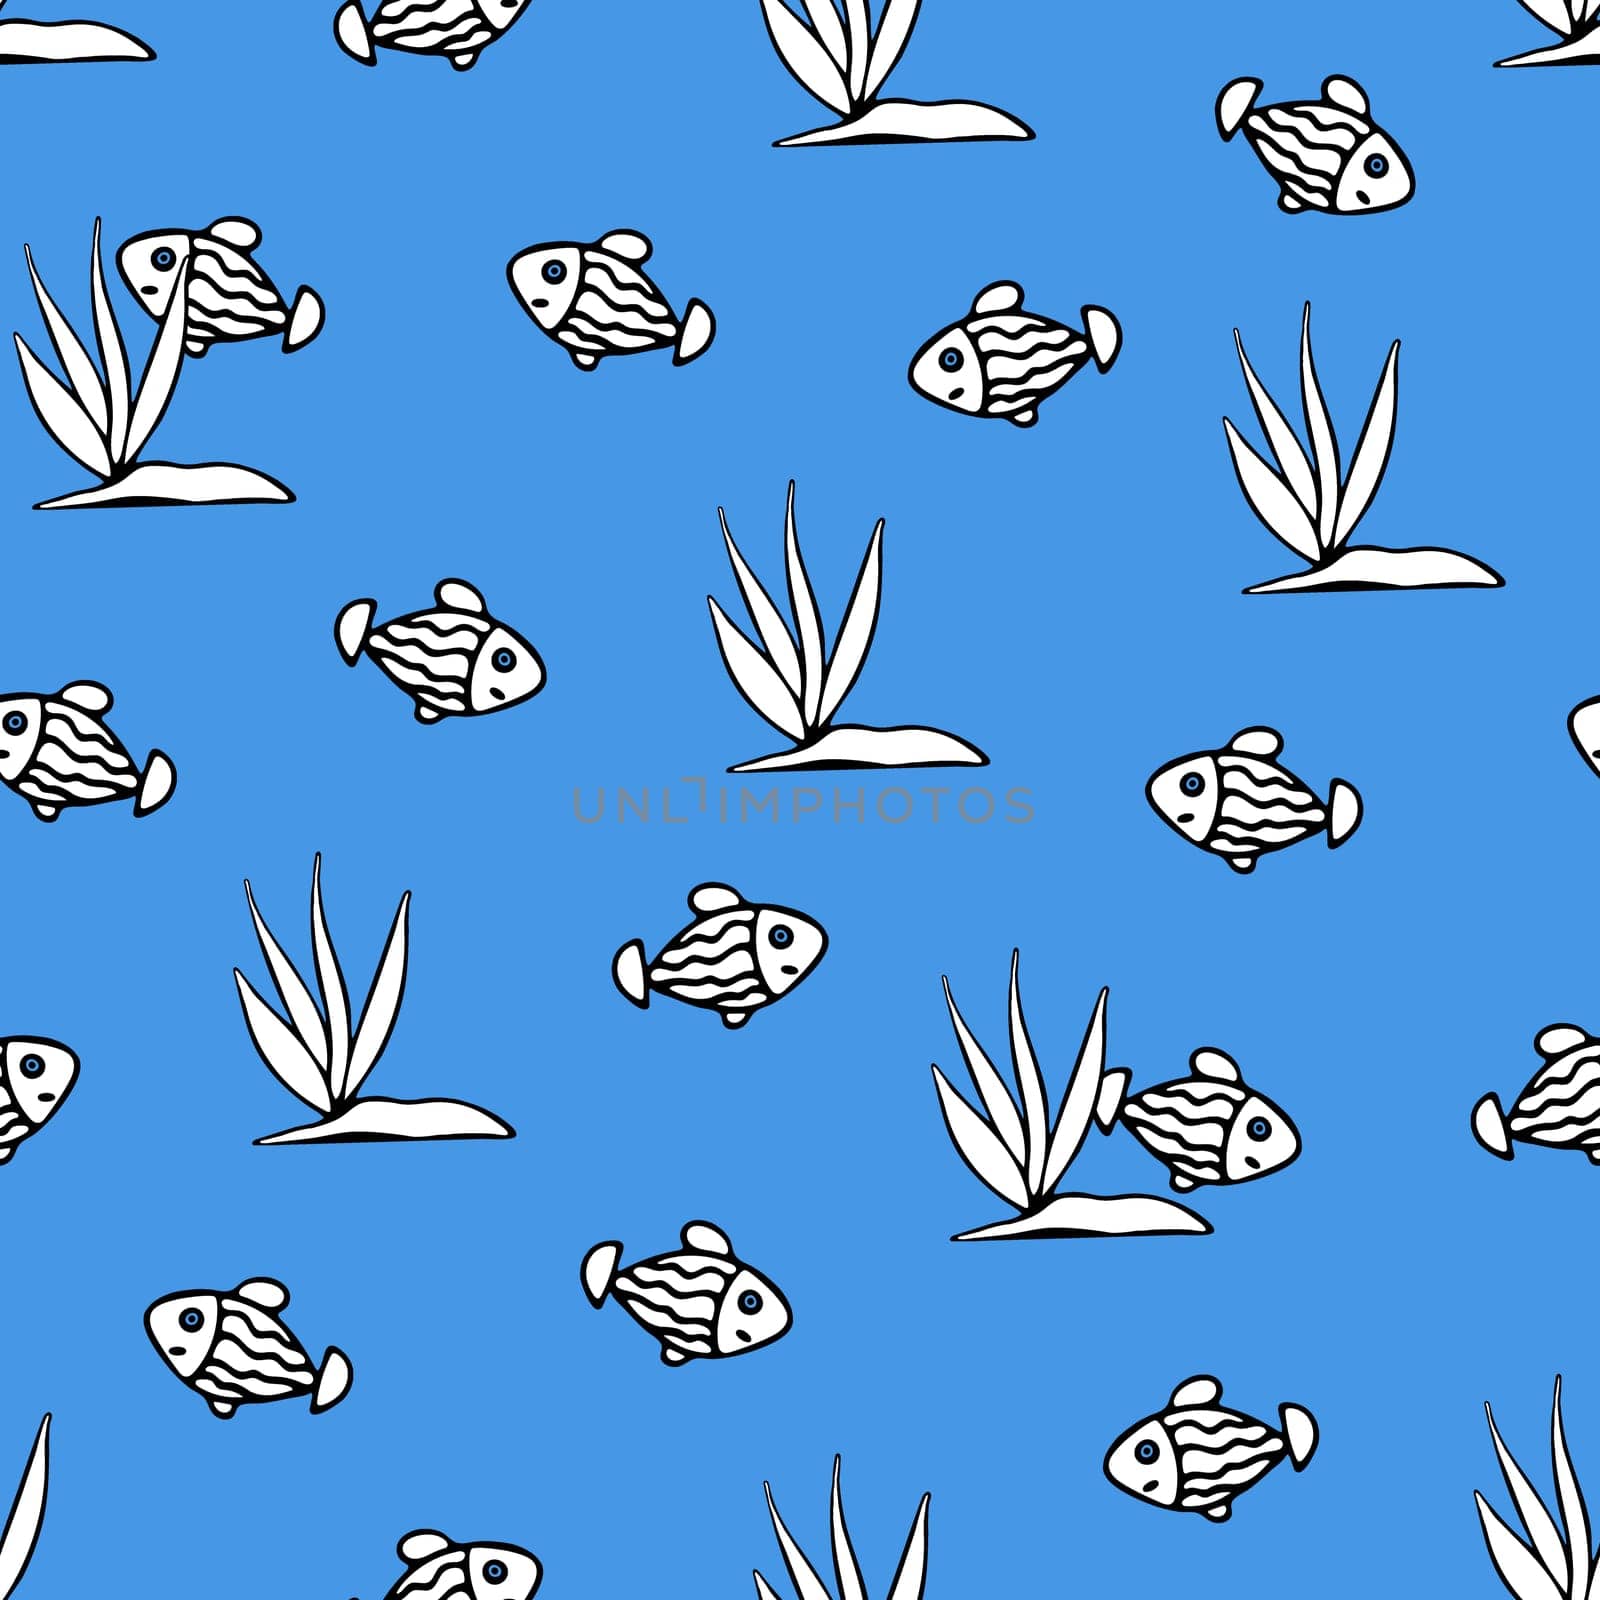 Small Fishes and Seaweeds Seamless Pattern. Background for Kids with Hand drawn Doodle Cute Fish and Sea Weed. Cartoon Sea Animals Simple Illustration.